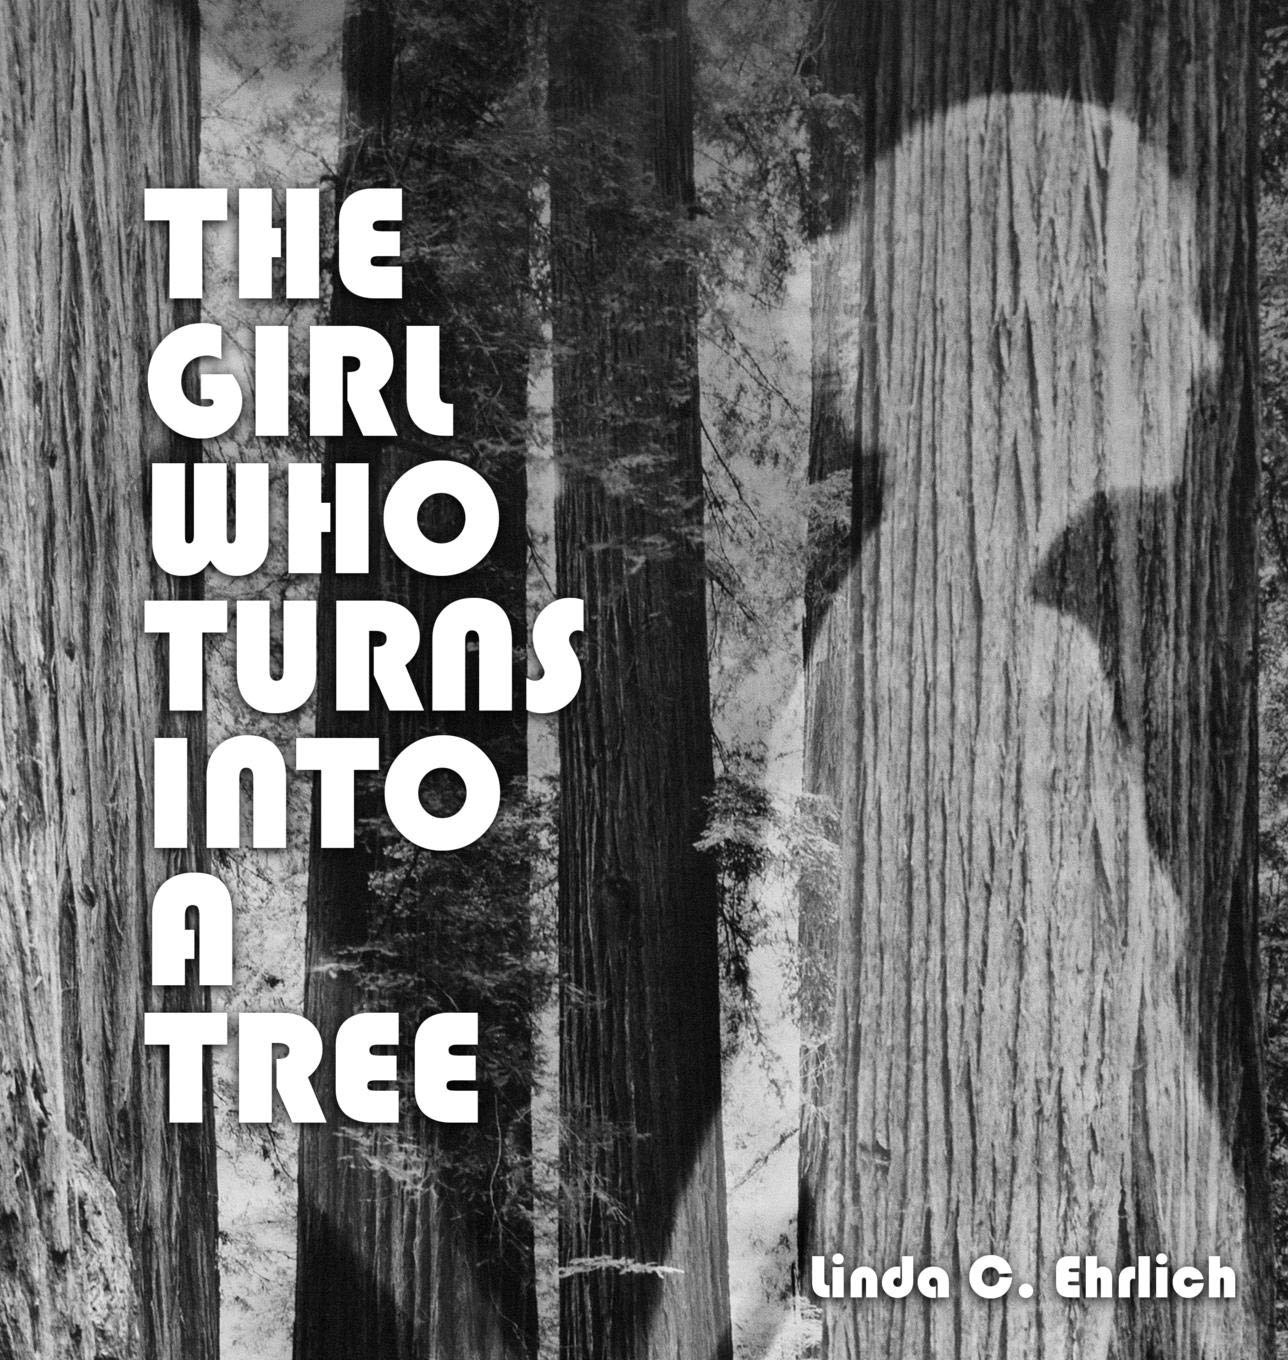 2016: Book cover, The girl who turn into a tree, United States